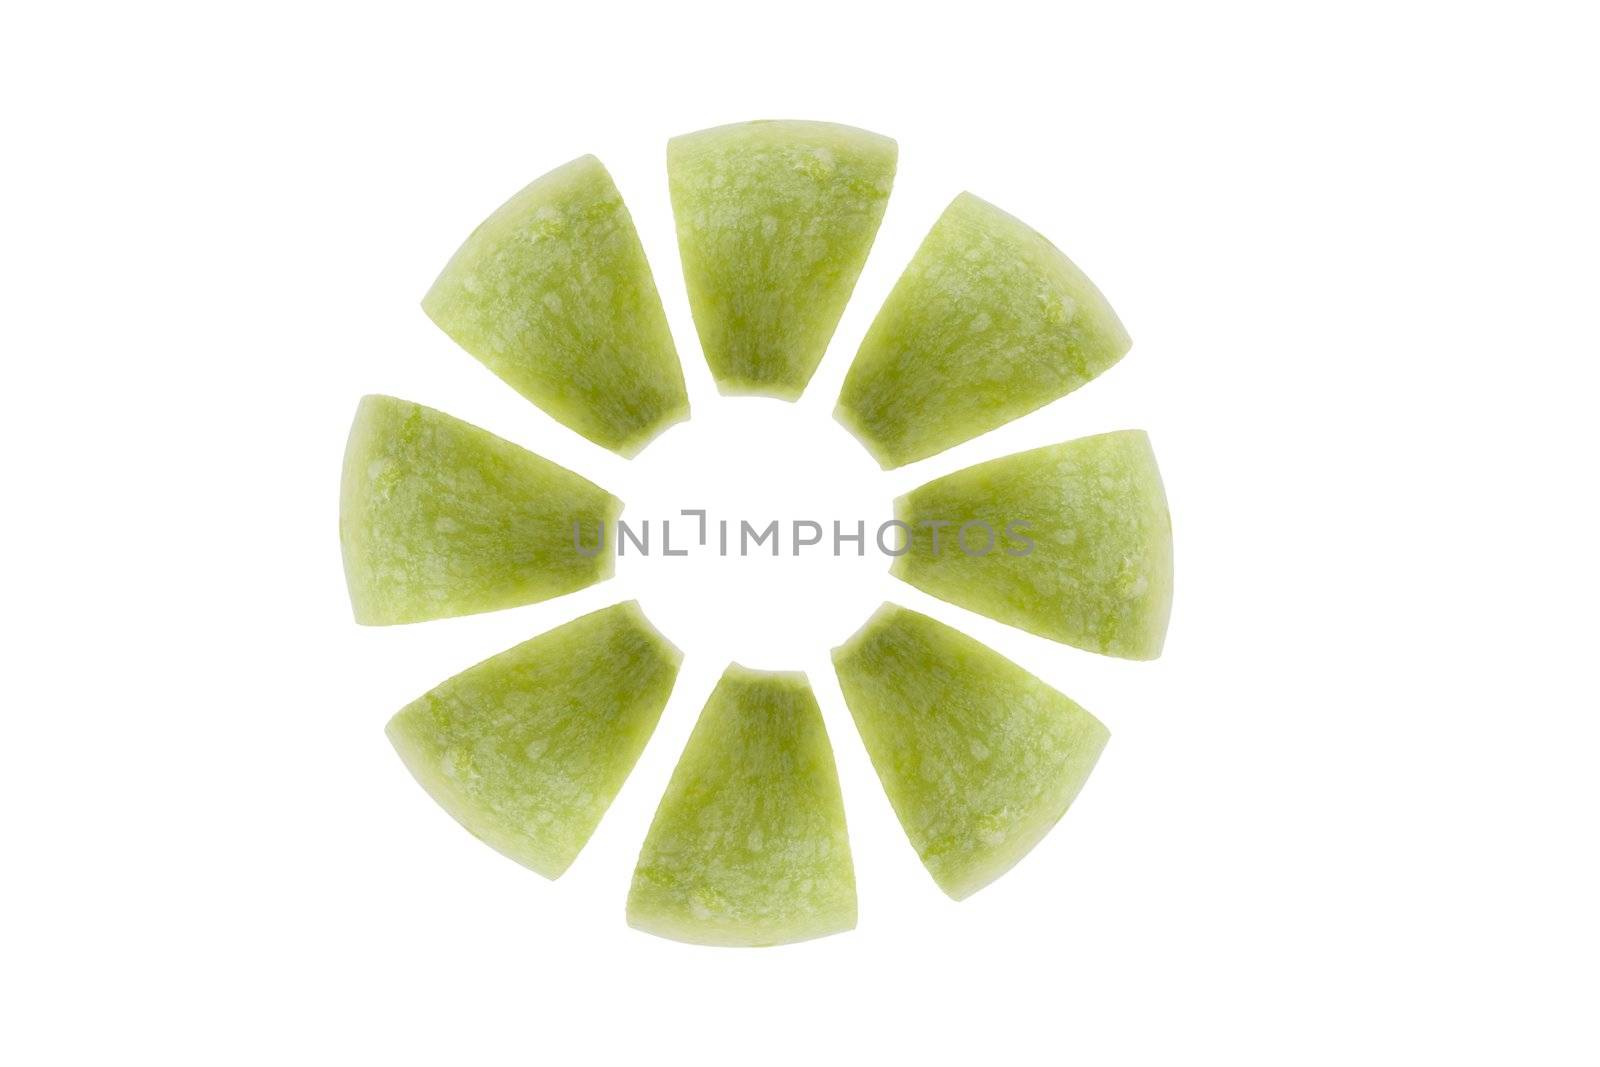 Apple slices in circular shape, view from above.  White background